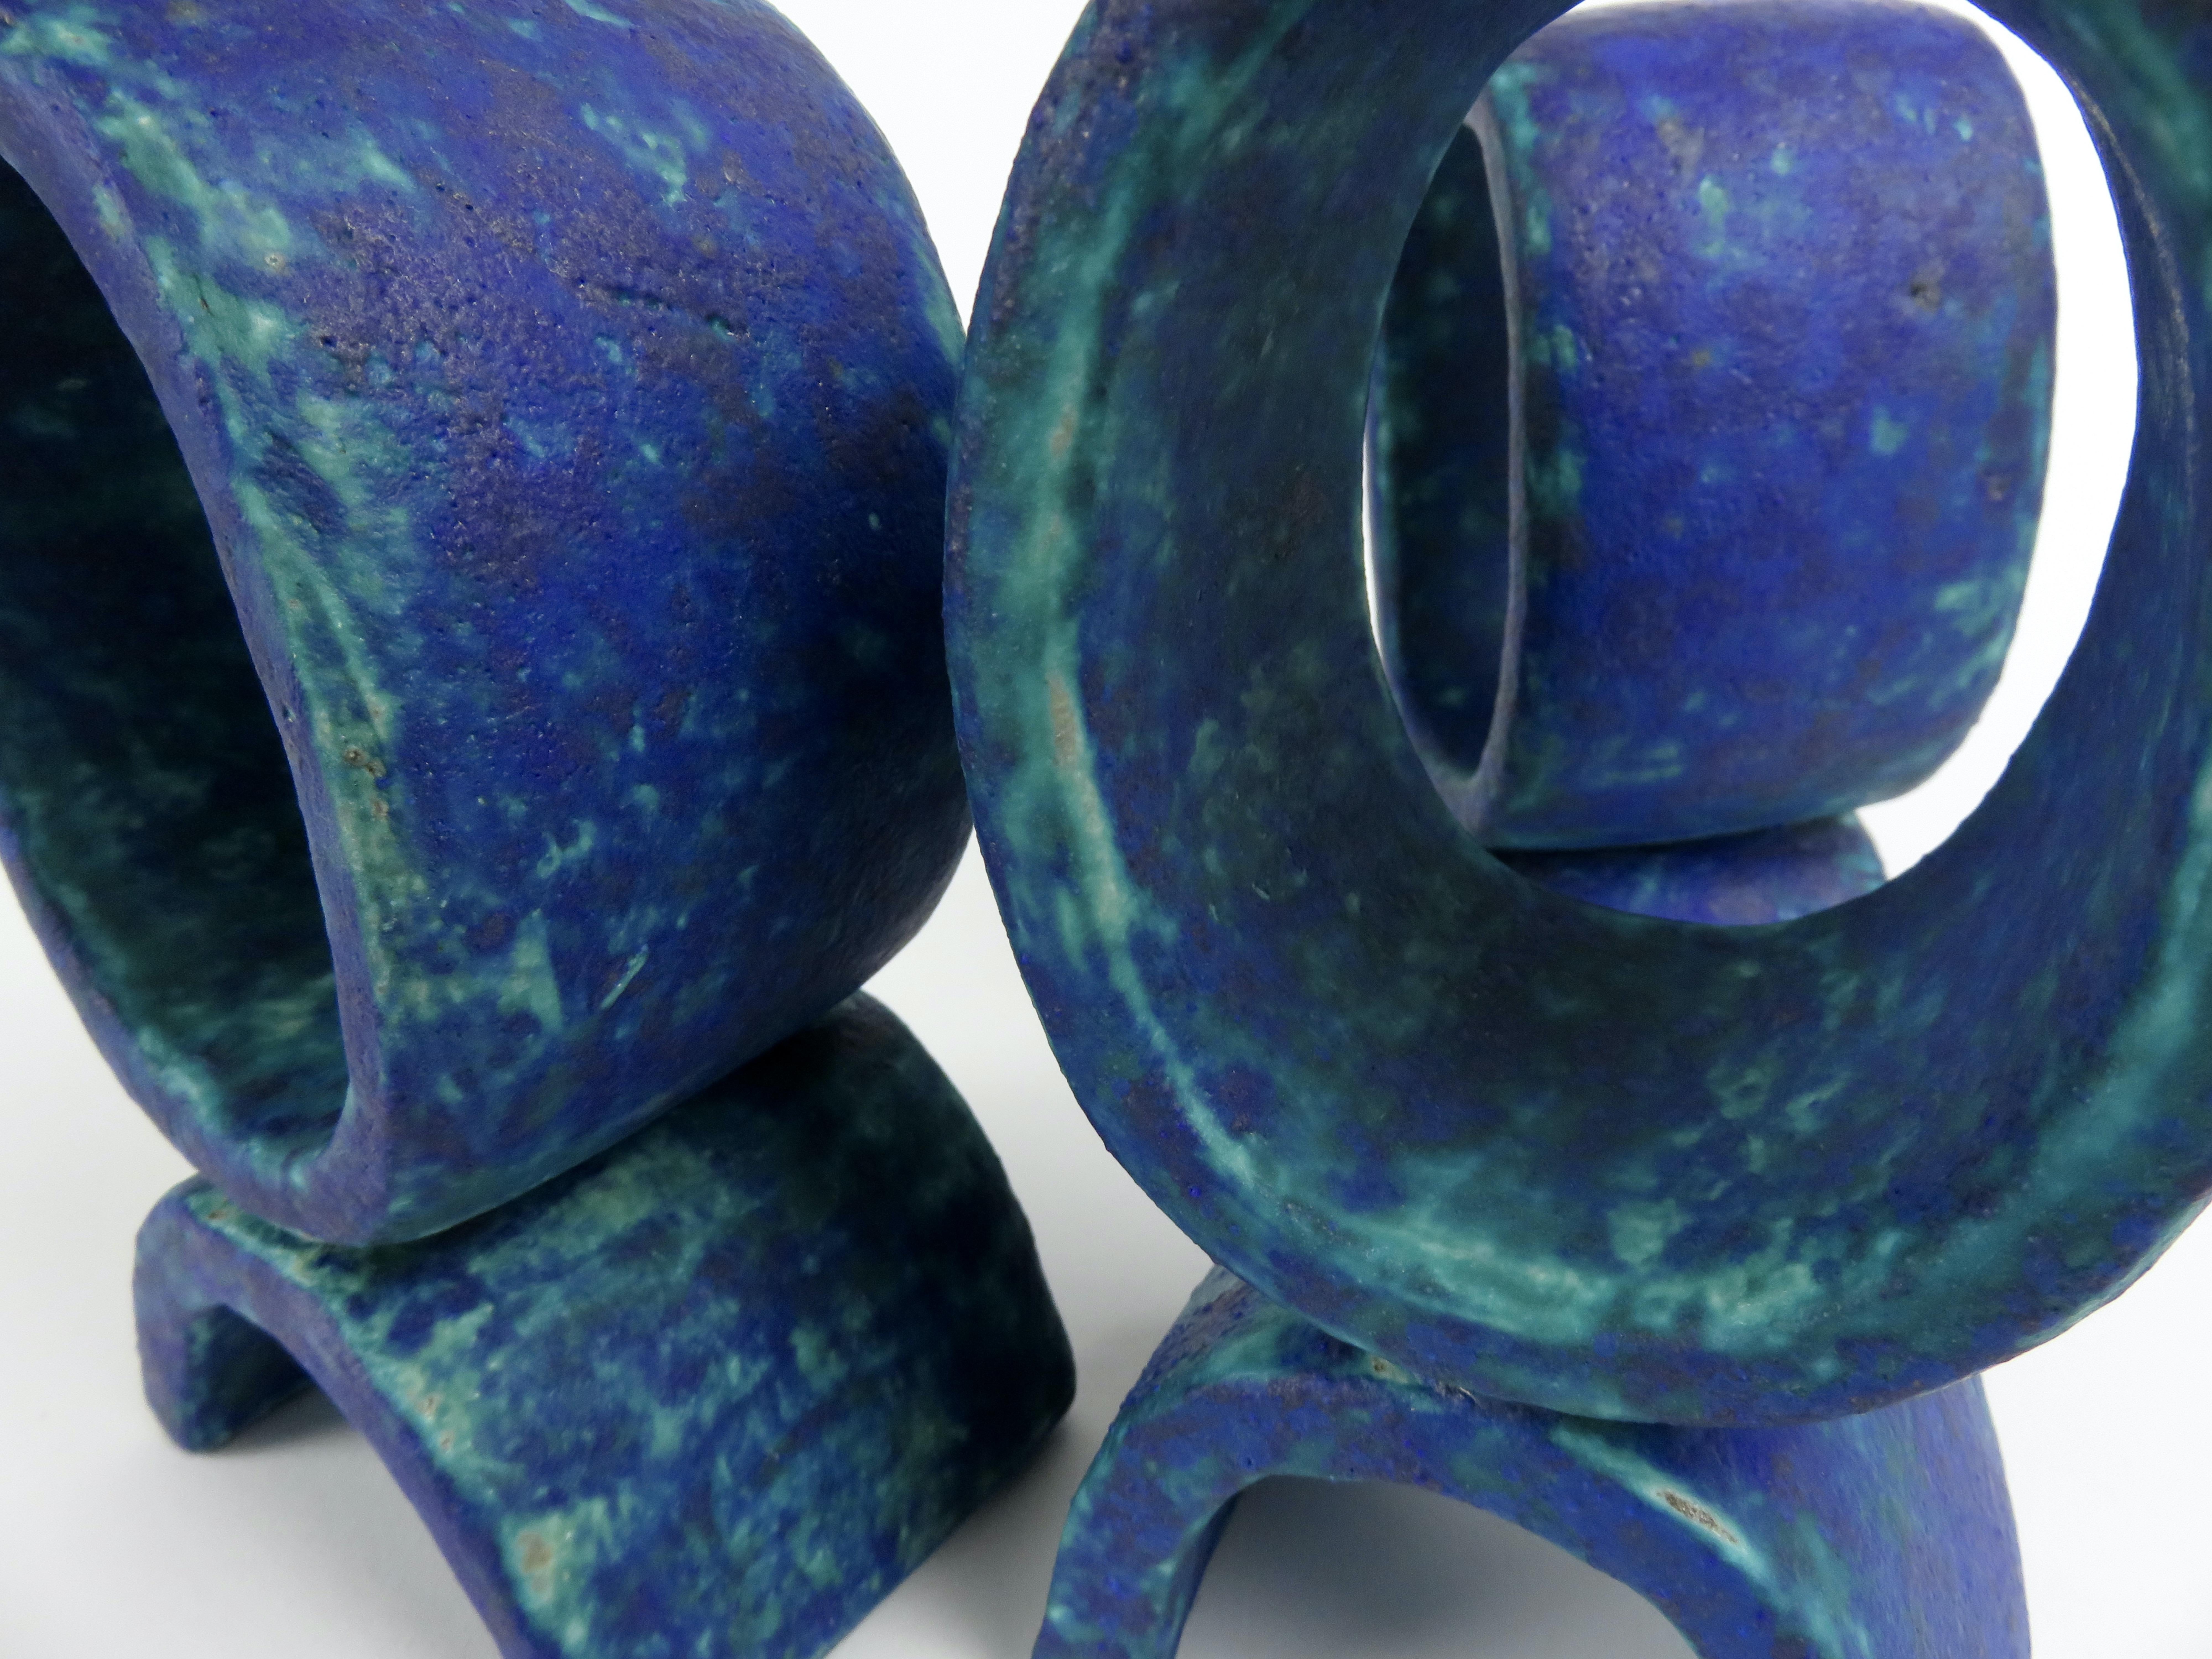 Mottled Turquoise and Deep Blue, 3 Ceramic Totems, Single Rings on Curved Legs For Sale 6